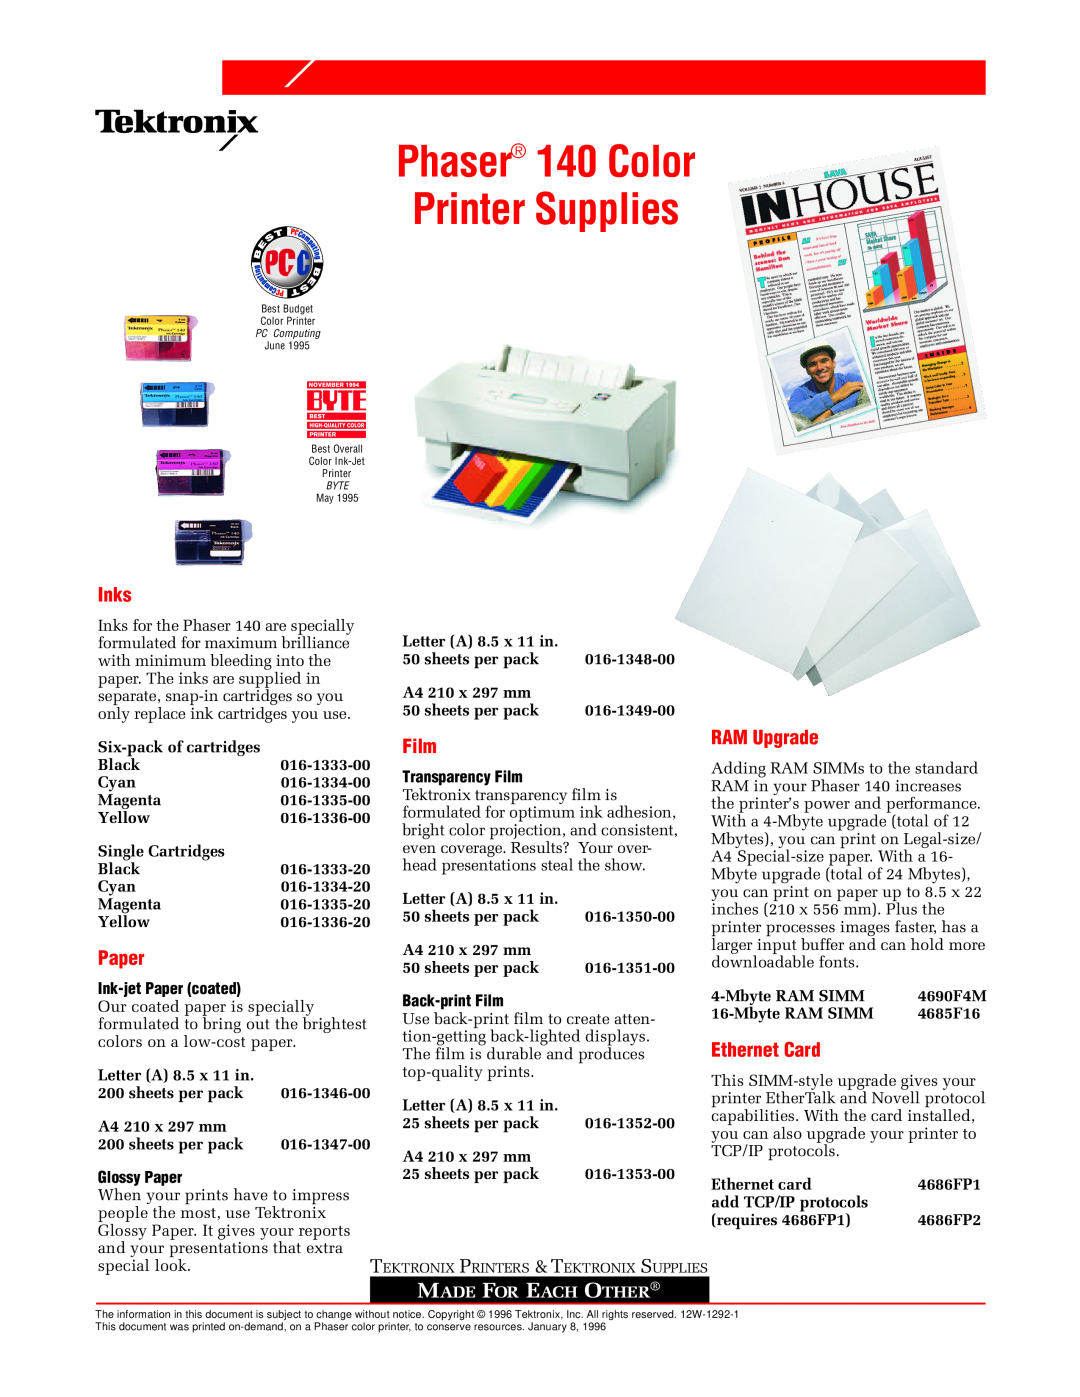 Tektronix 4690F4M manual Printer Supplies, Phaser 140 Color, Inks, Film, RAM Upgrade, Ethernet Card, Glossy Paper 